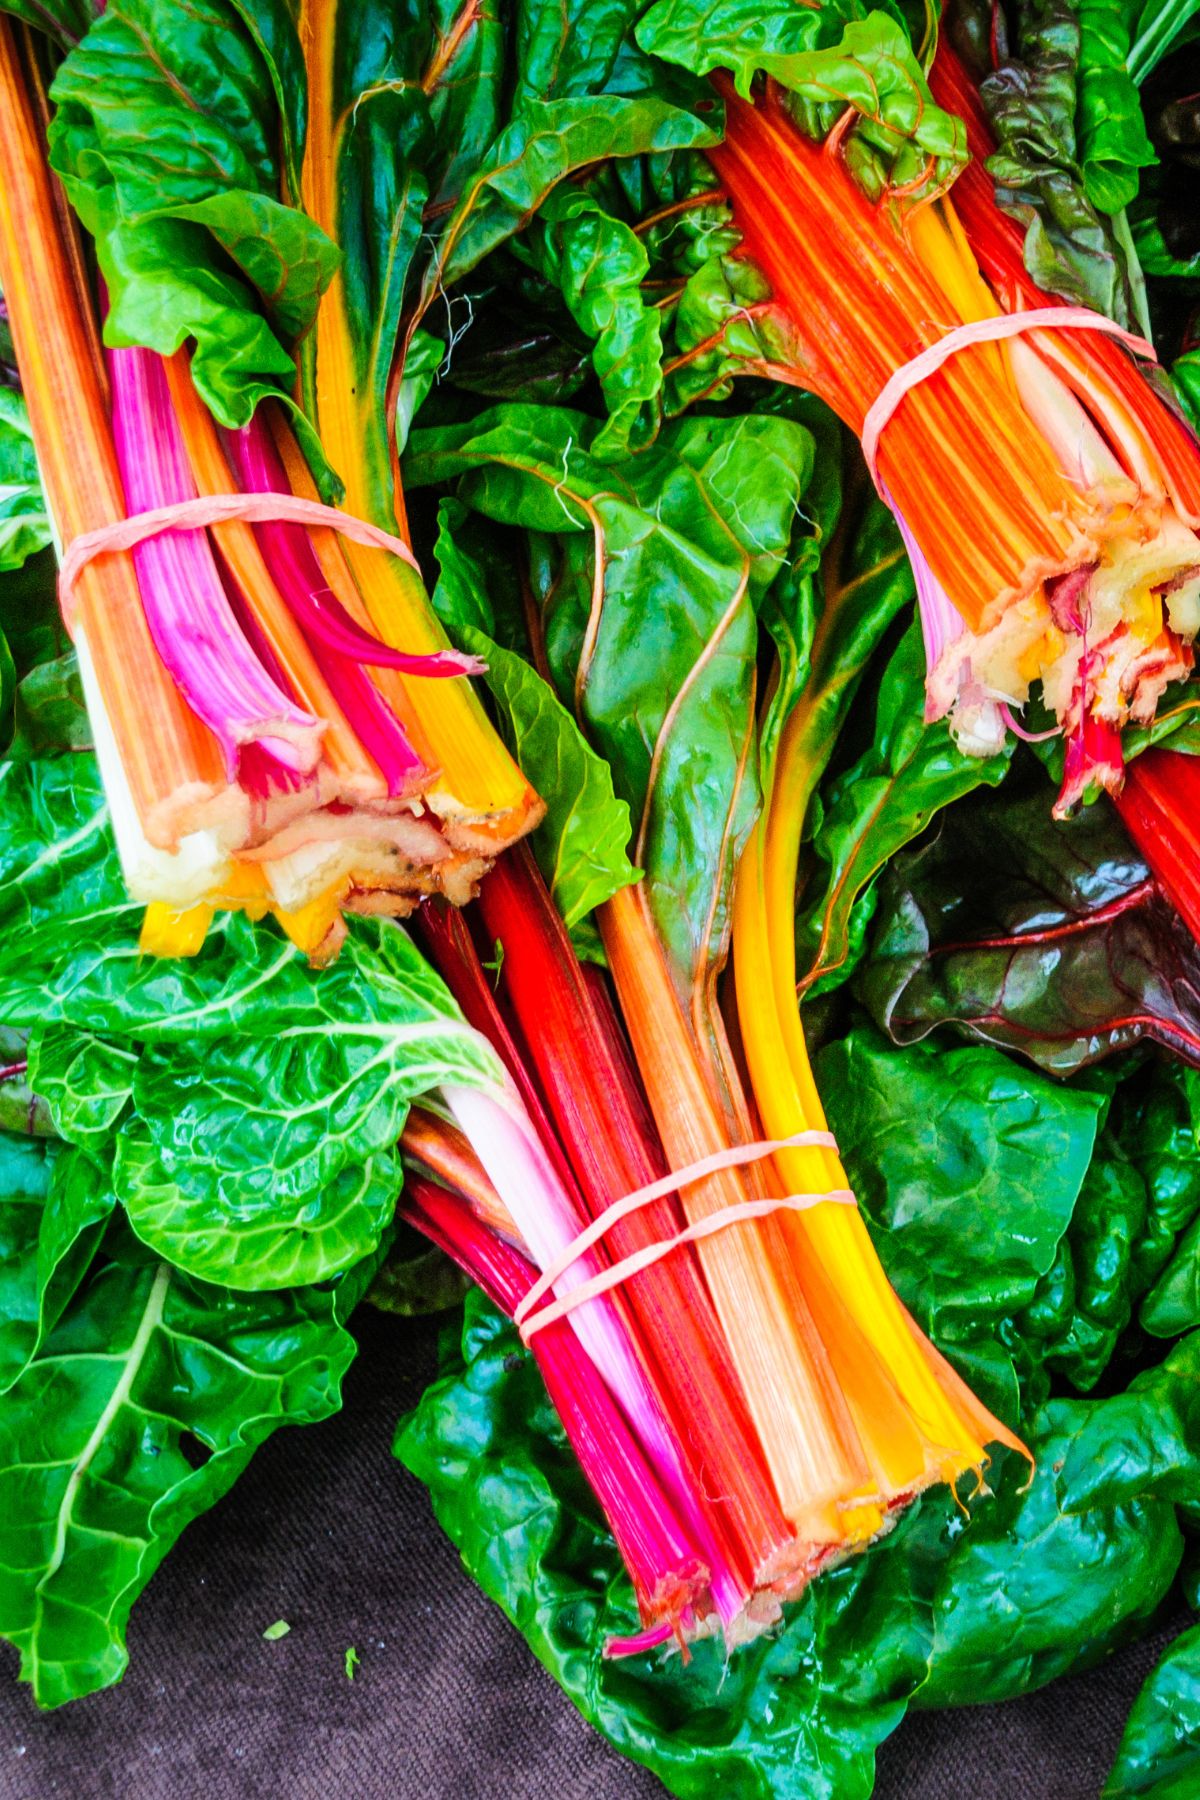 Several rubberbanded bunches of rainbow chard.